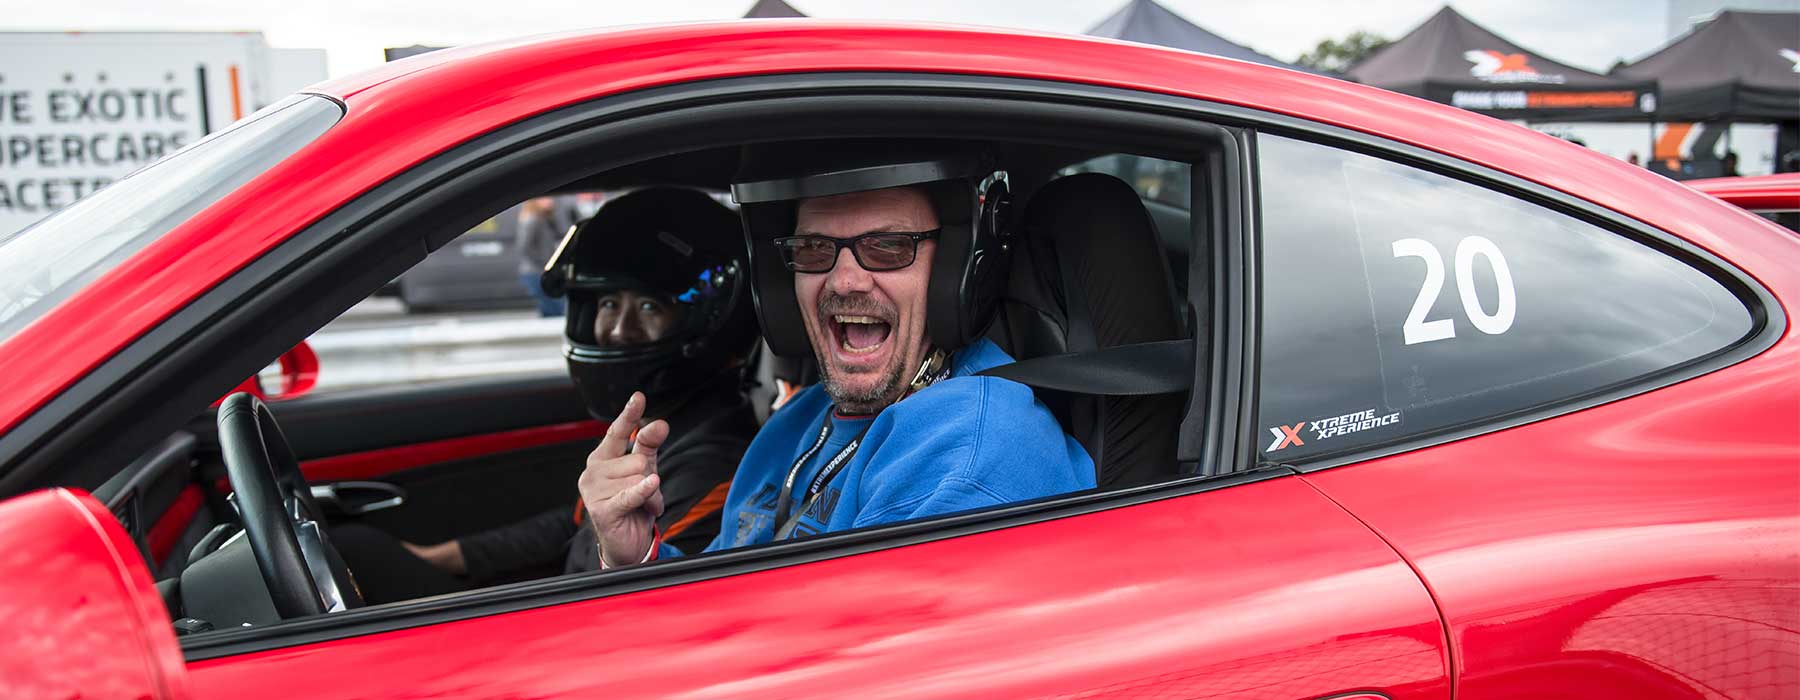 Supercar Driving Experience on a racetrack at Xtreme Xperience